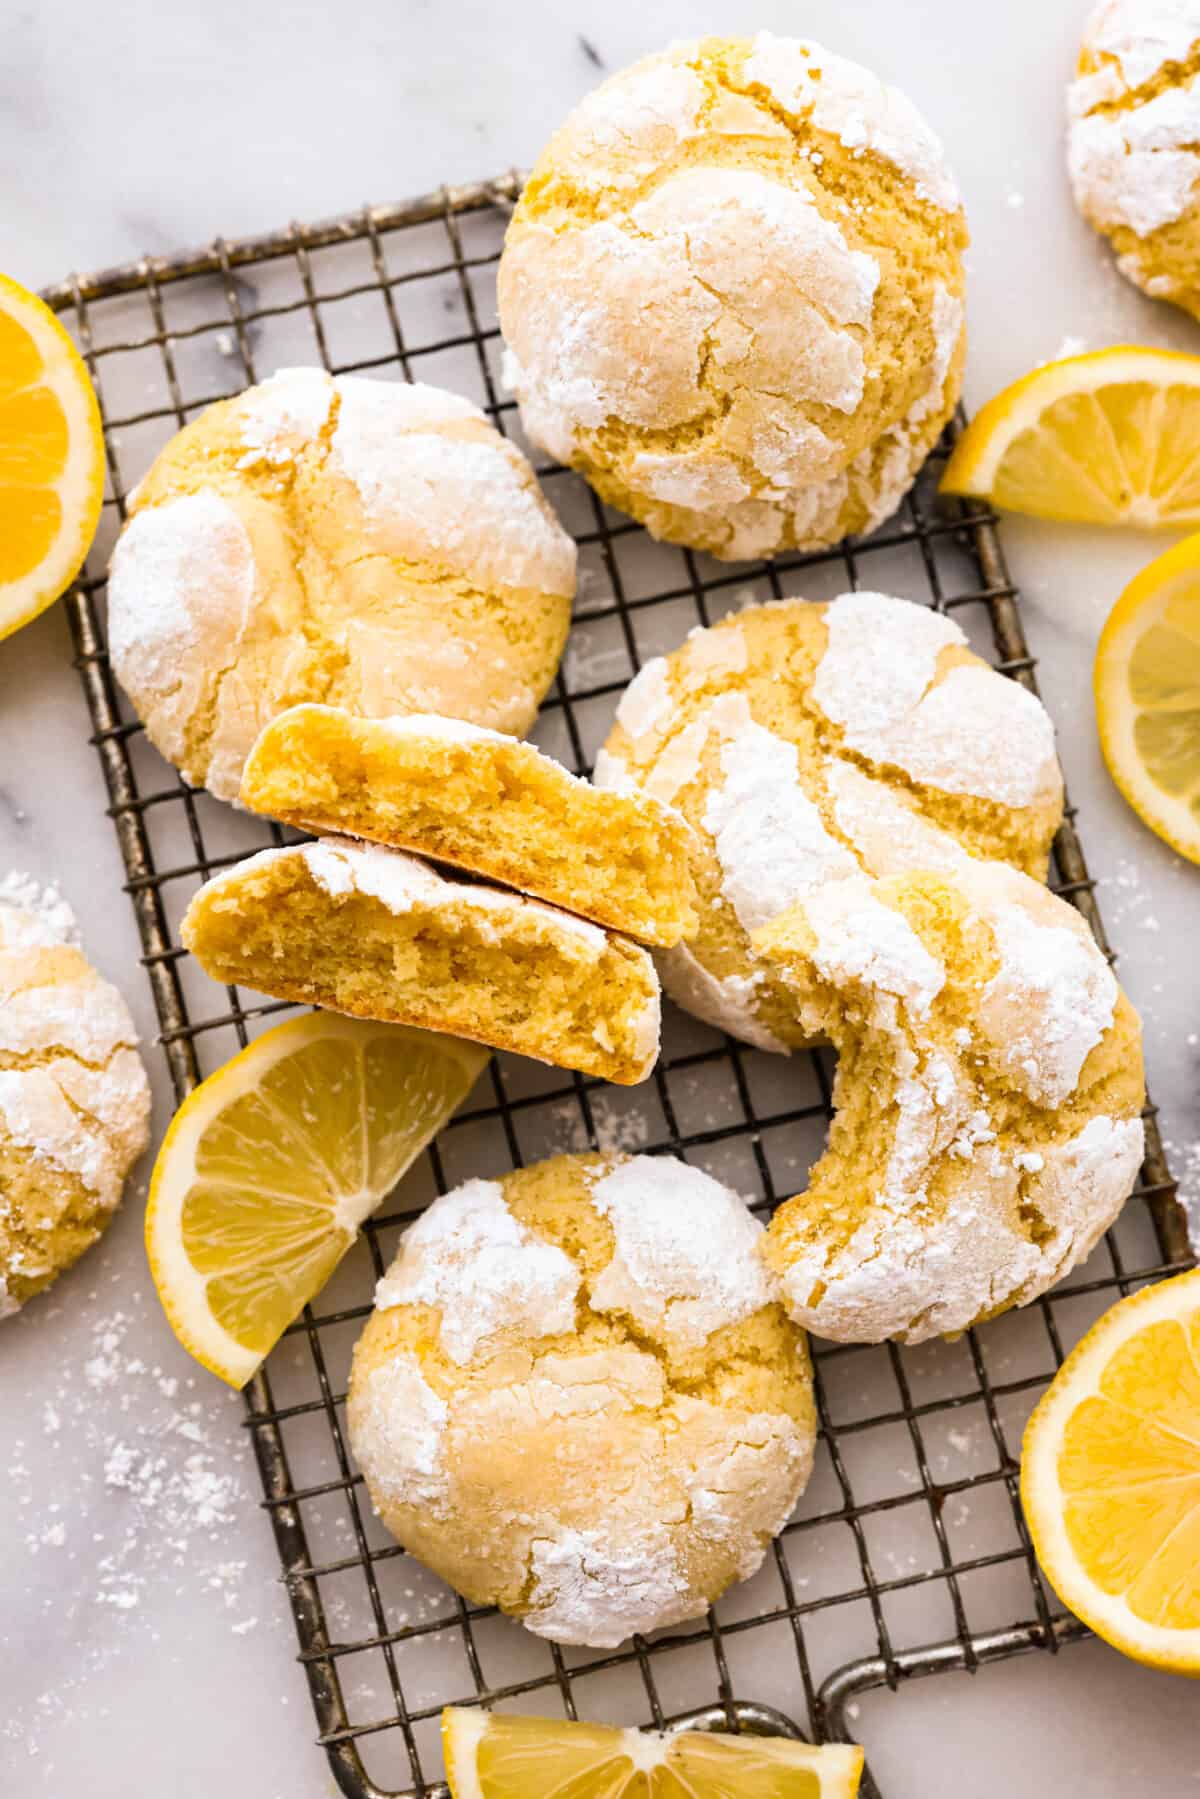 The crinkle cookies on a wire rack. Some have a bite taken out of them or are broken in half. - Lemon Crinkle Cookies